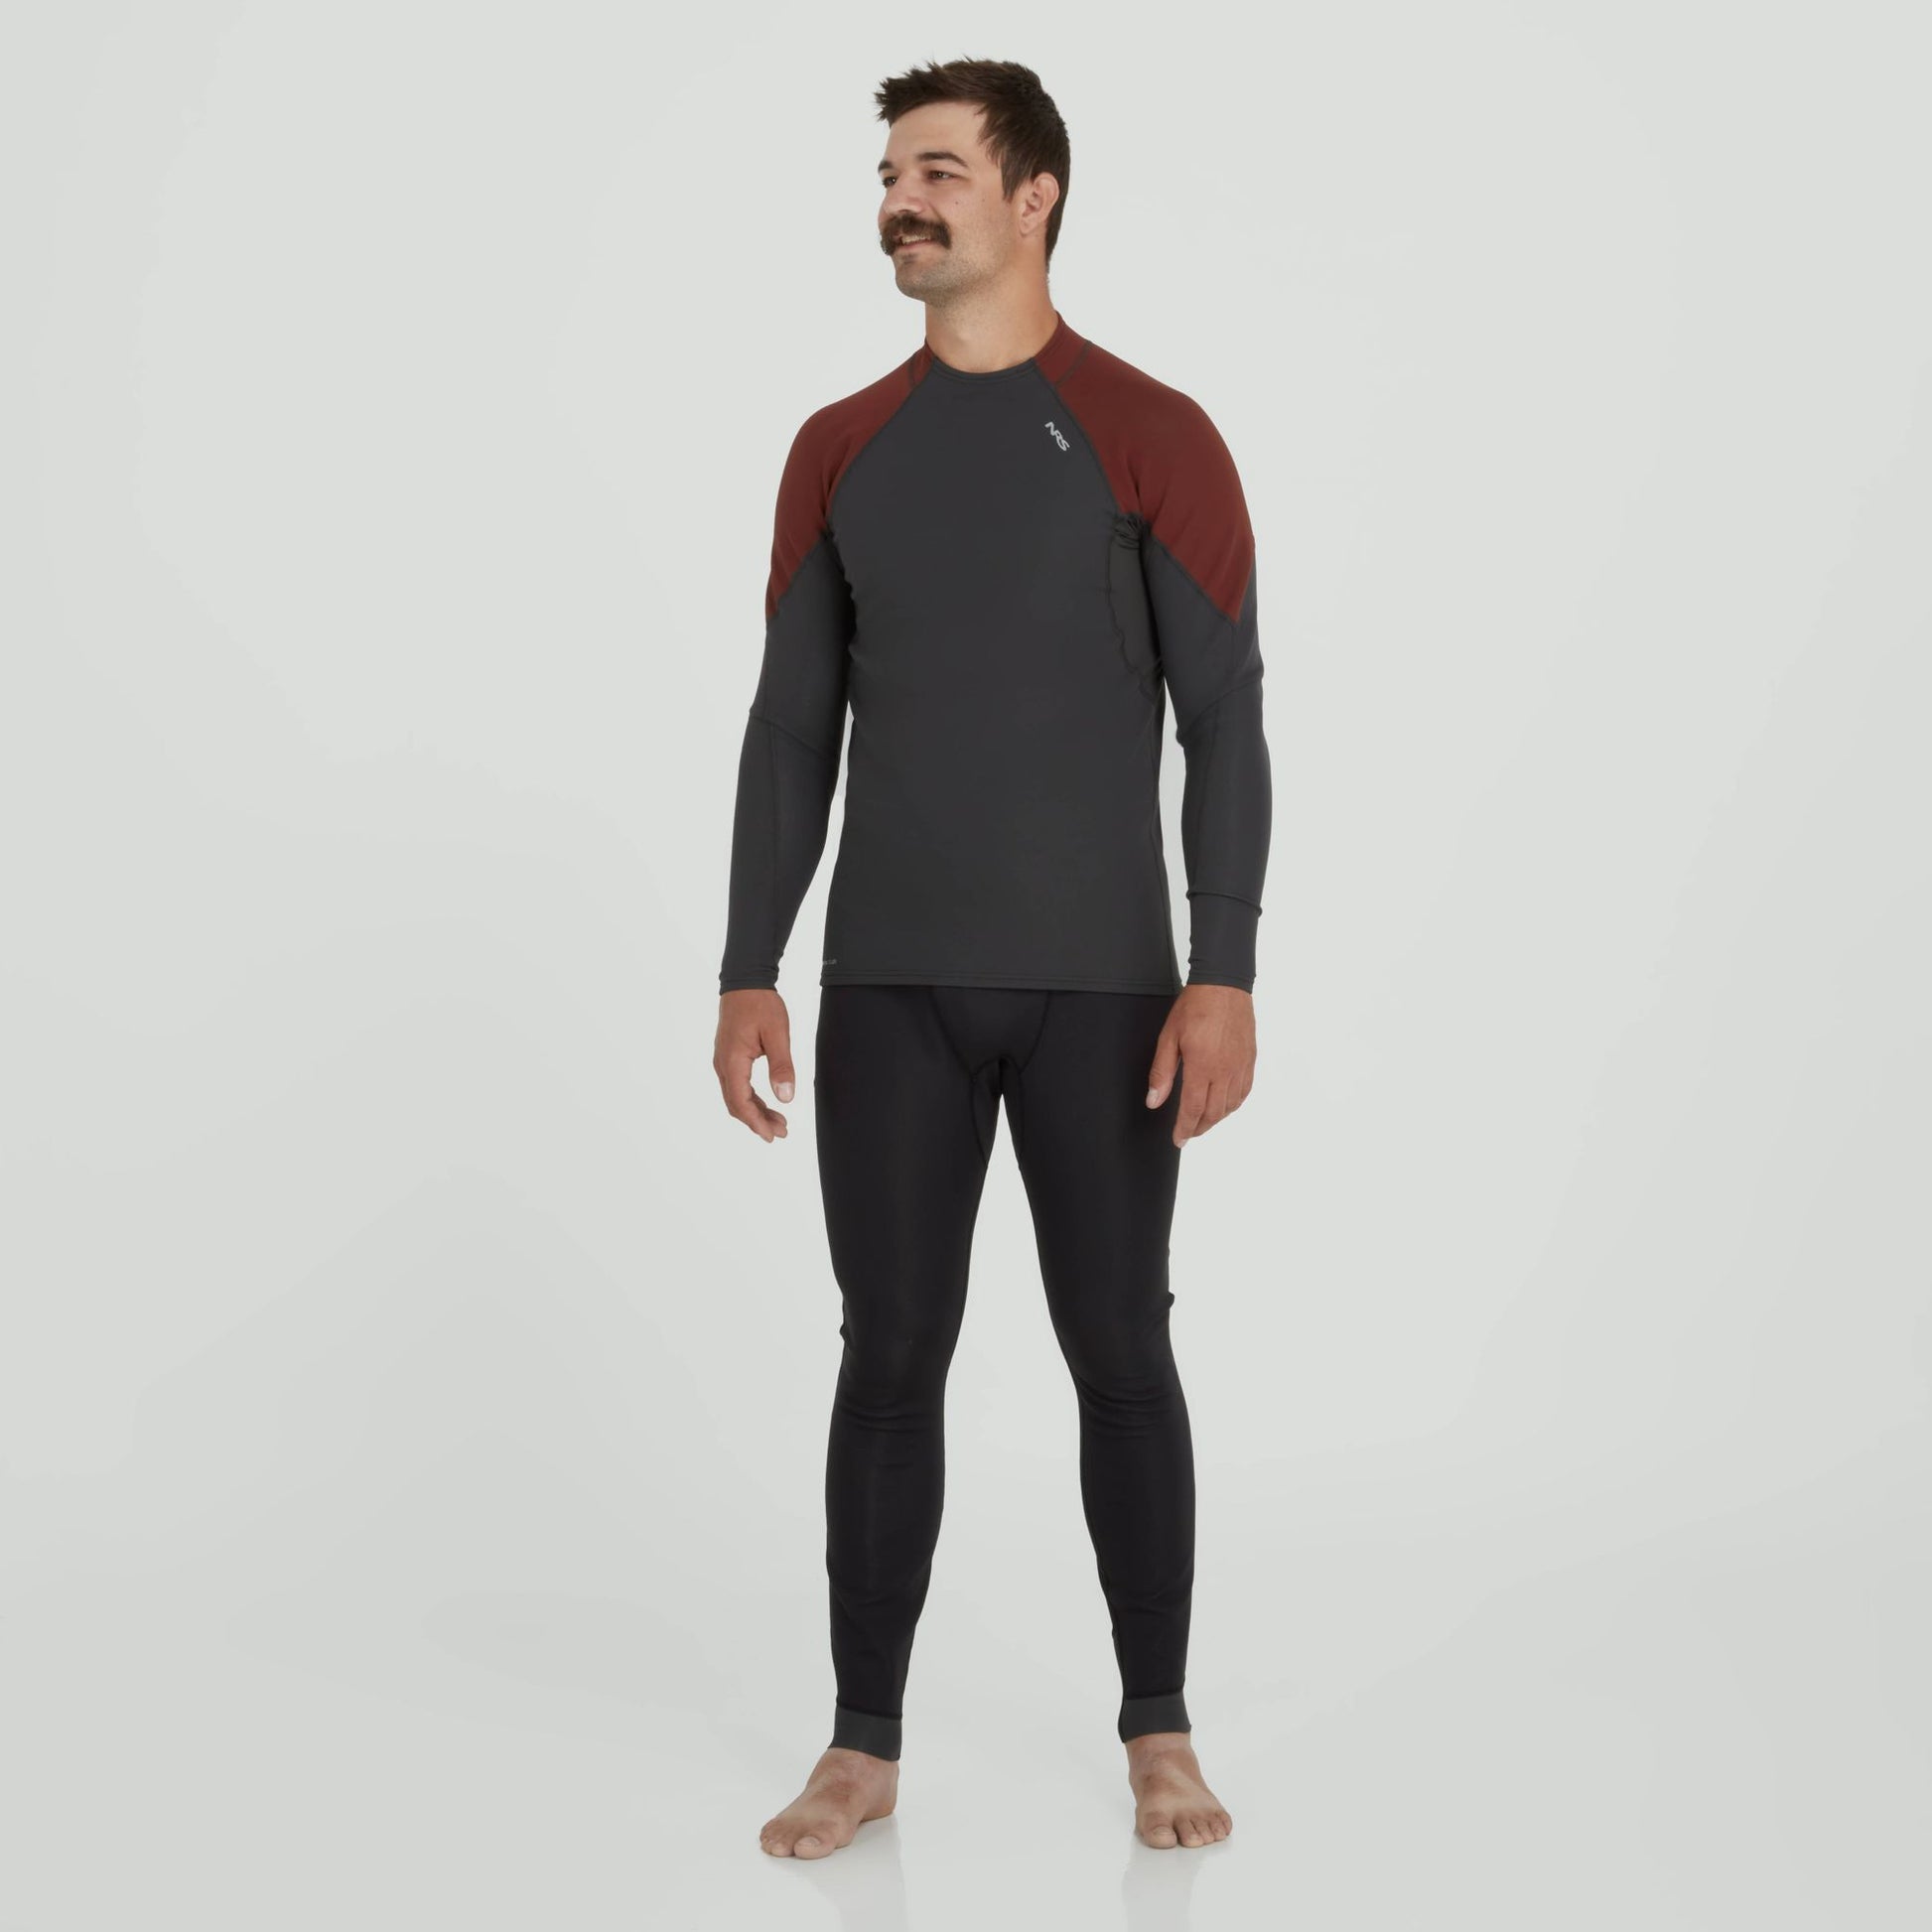 A man wearing an NRS Hydroskin 0.5 Long Sleeve Shirt, a black and red long-sleeved wetsuit that doubles as an insulating top.